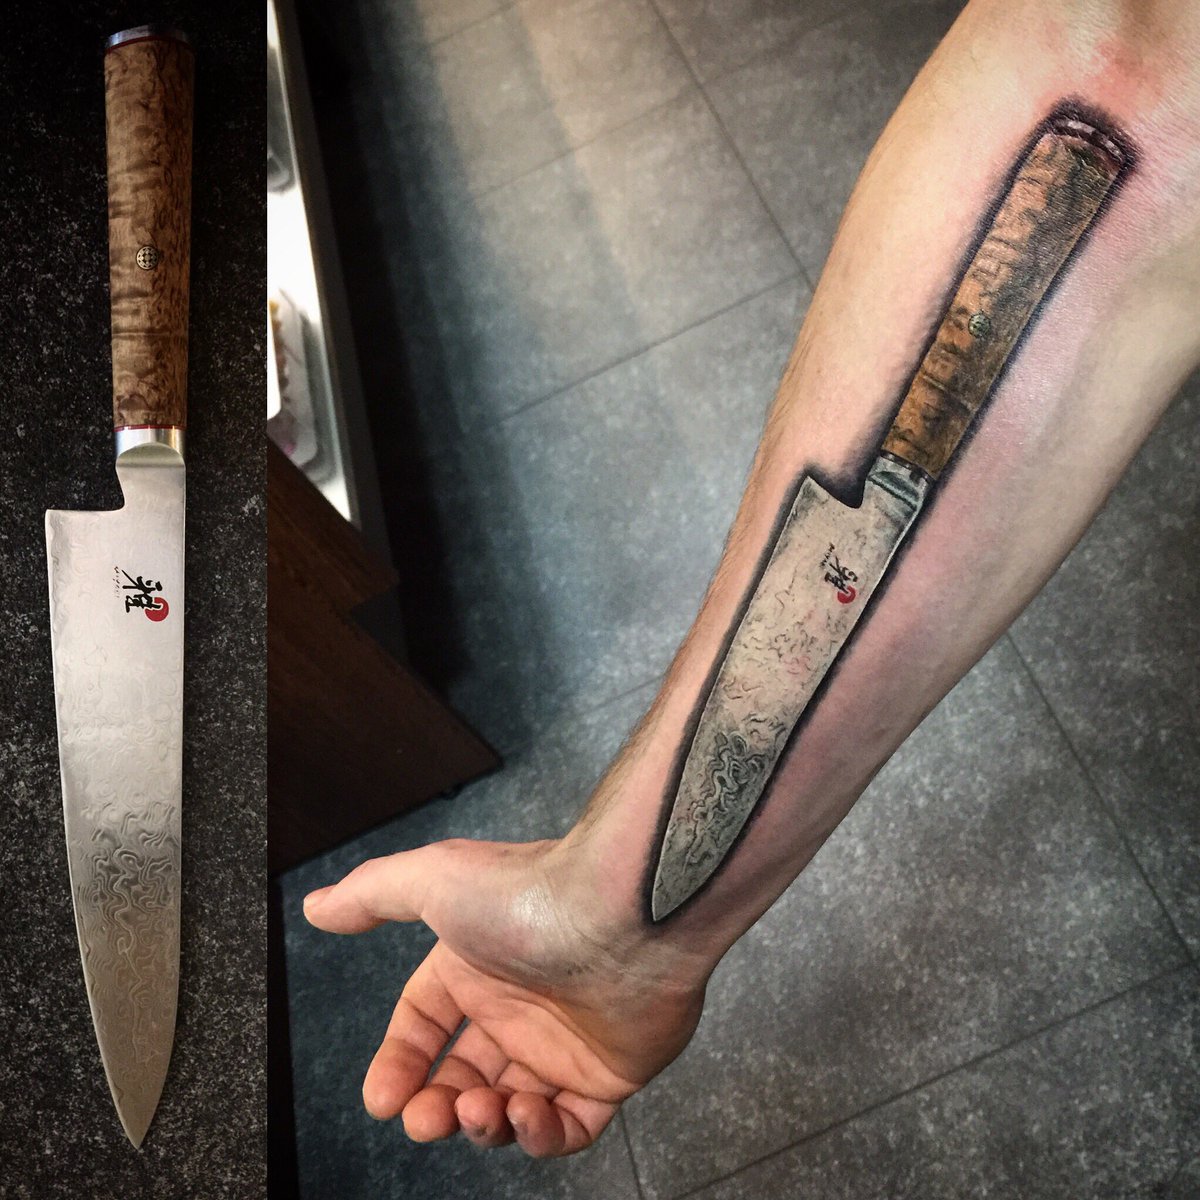 11 Best Chef Knife Tattoo Design Ideas for Men and Women in 2020  inktells